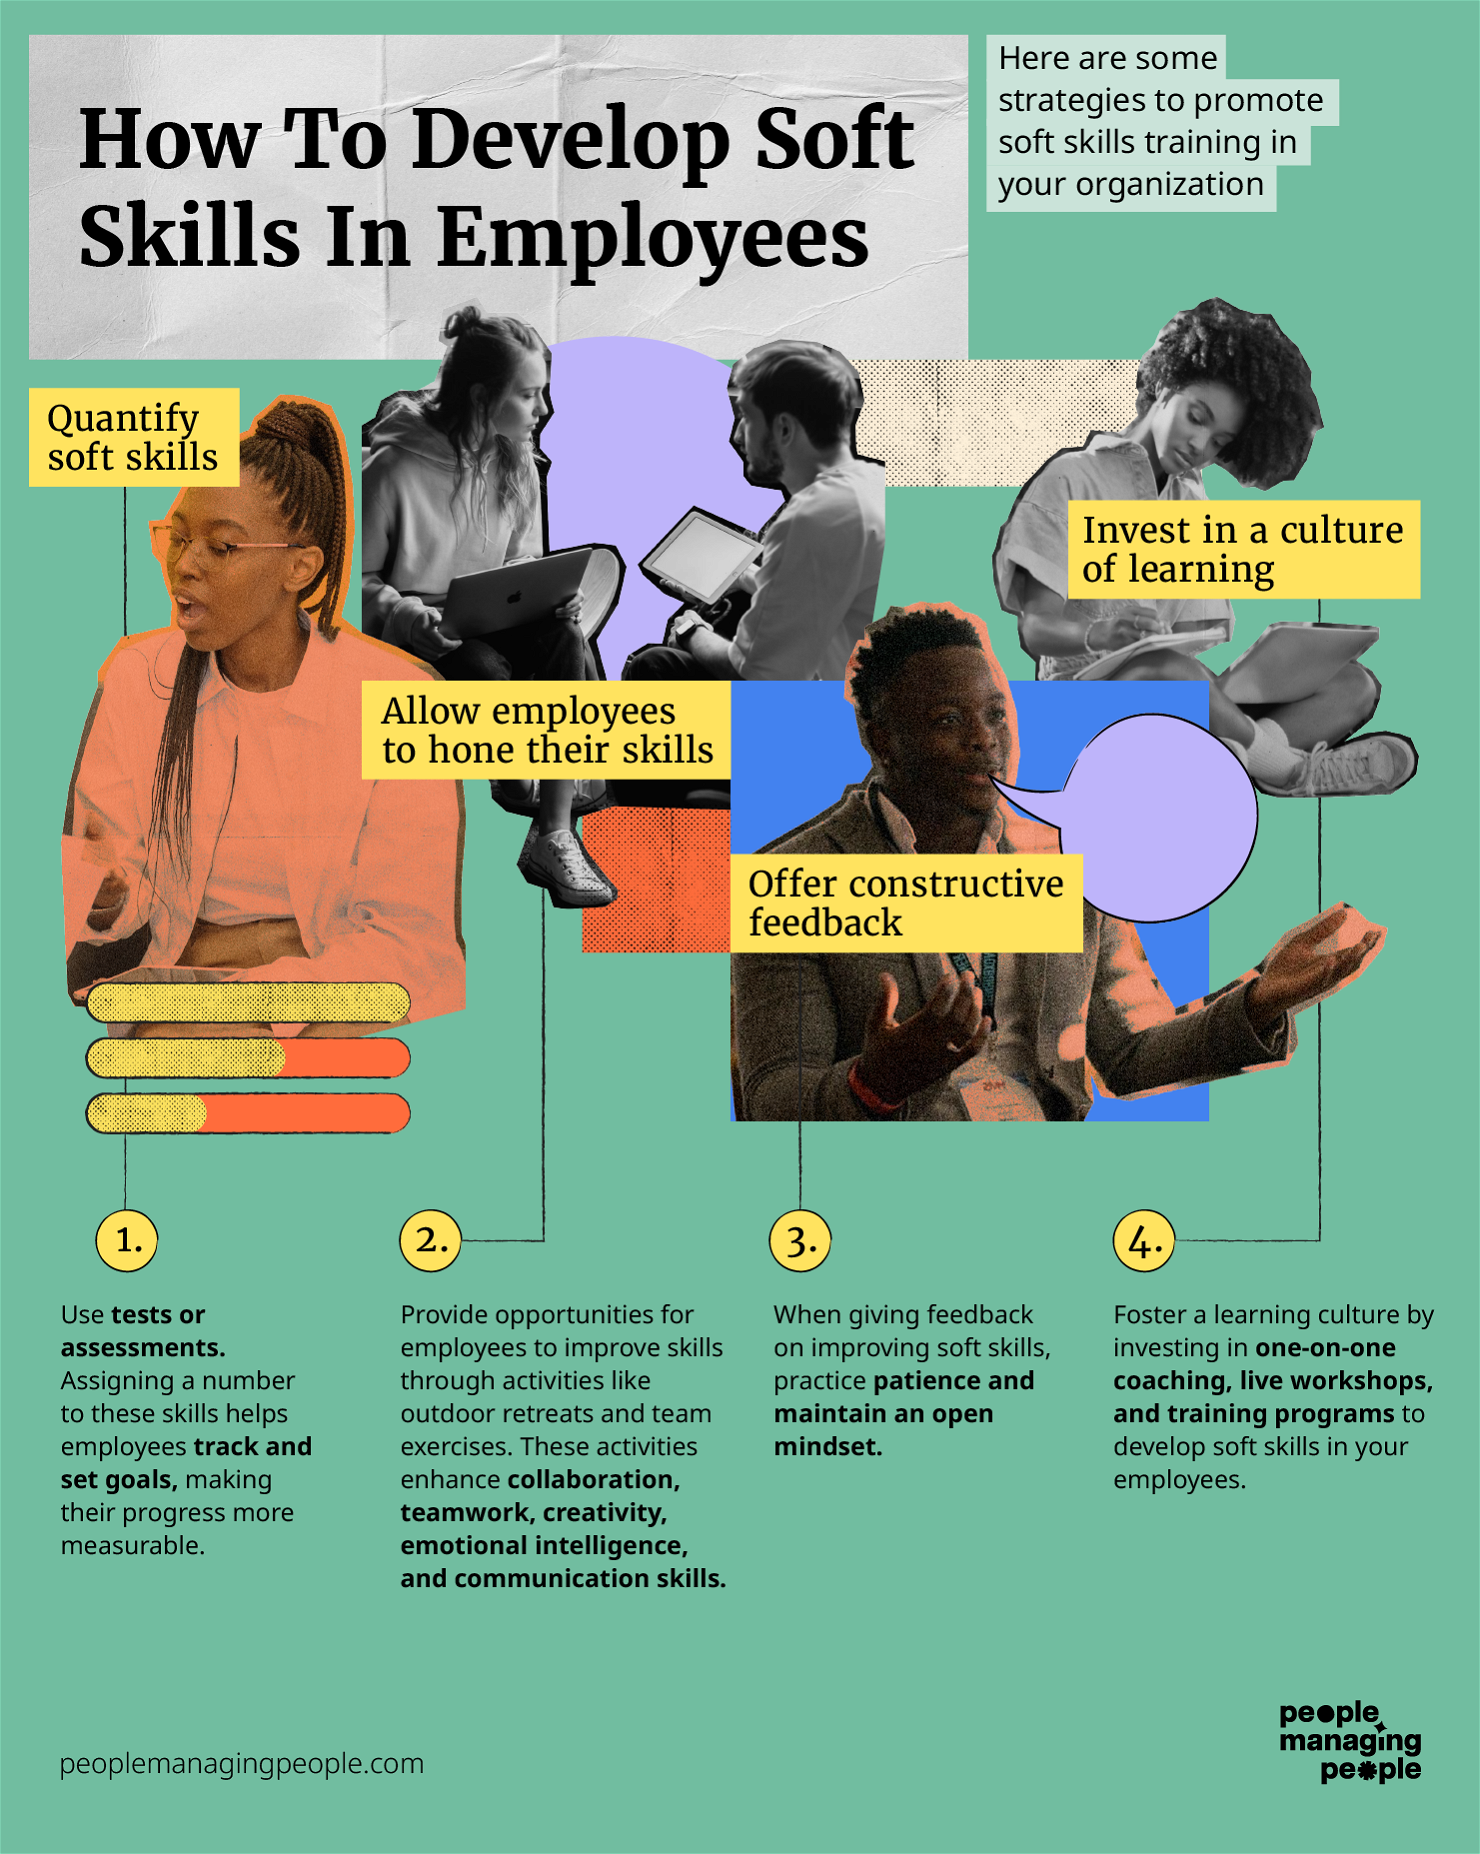 An image illustrating strategies for developing soft skills in employees. The background shows employees engaged in various tasks. Text overlays highlight key points: "Quantify soft skills", "Invest in a culture of learning", "Allow employees to hone their skills", and "Offer constructive feedback".